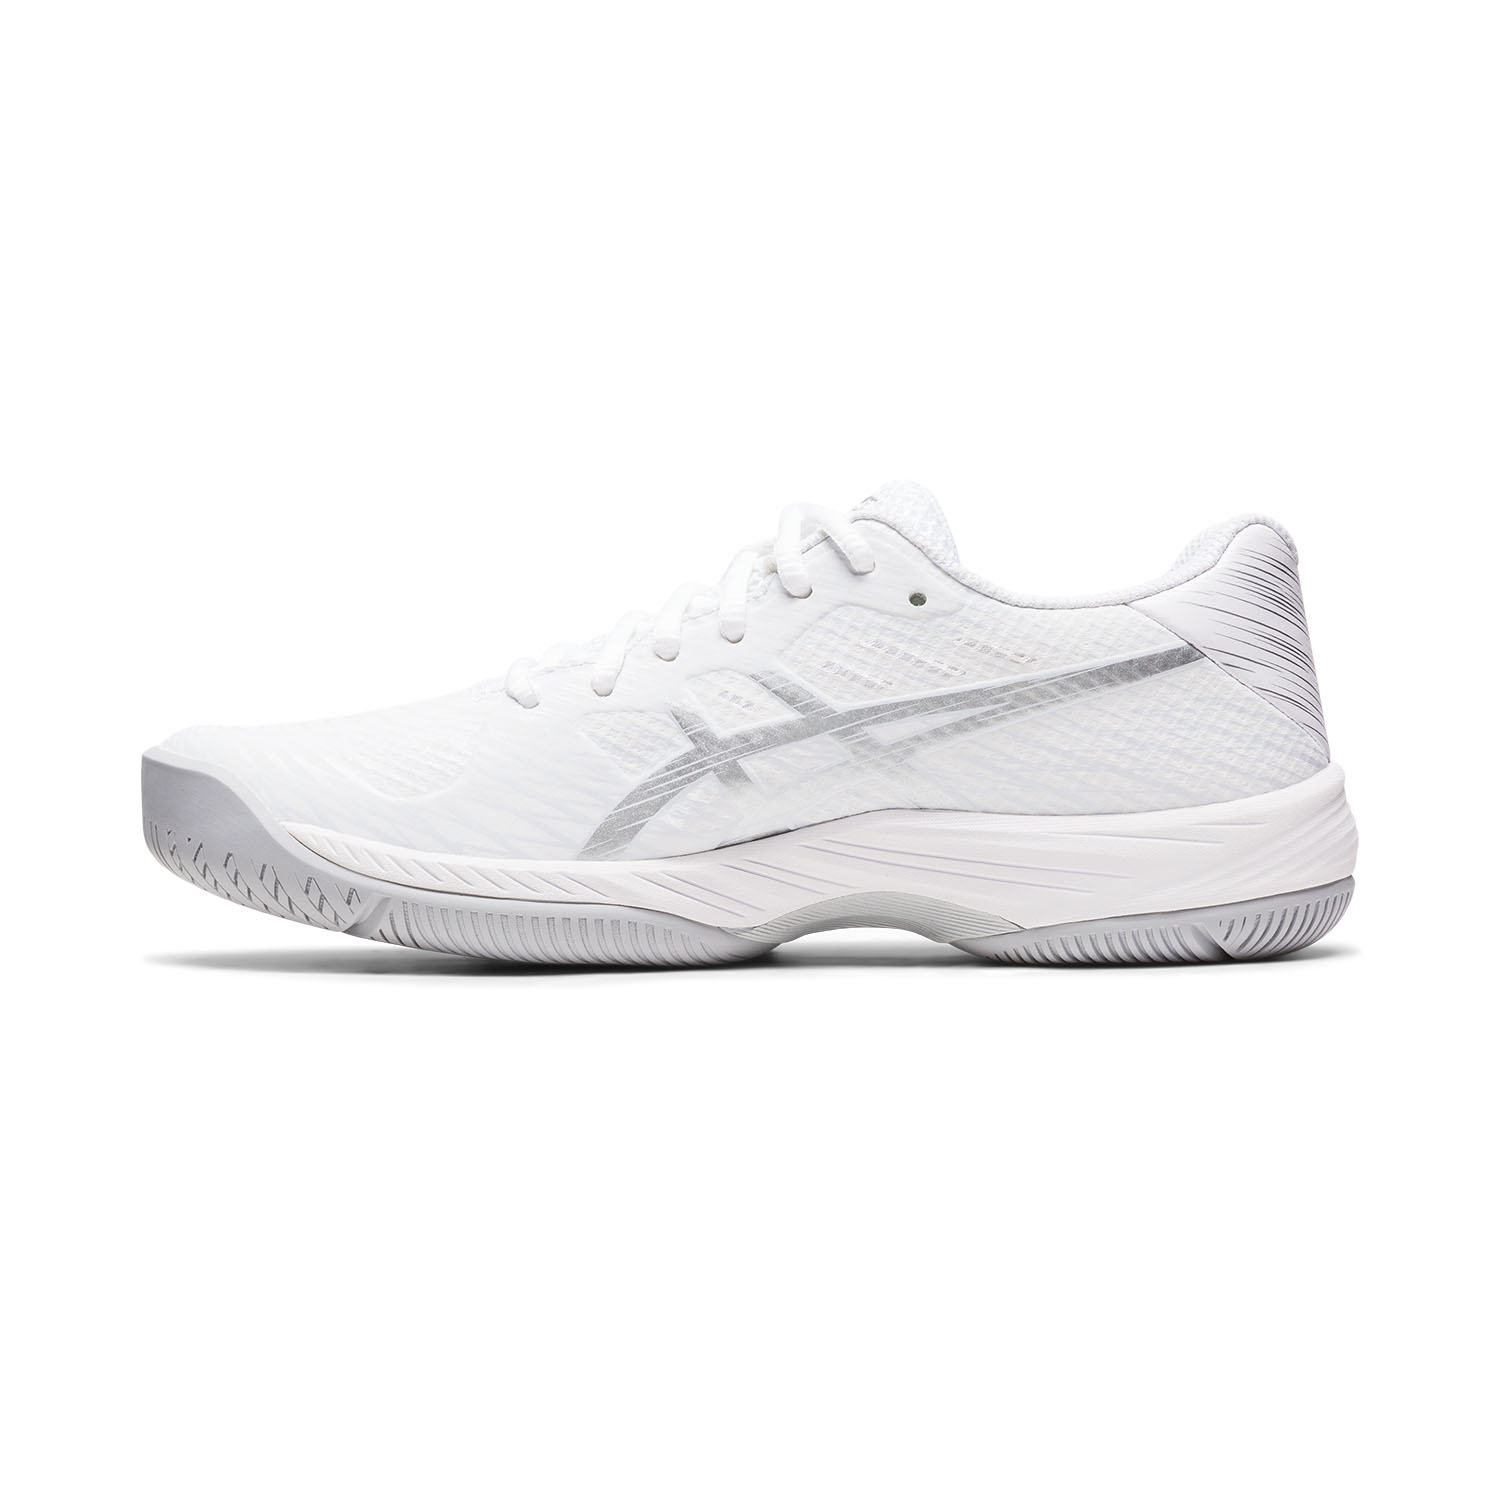 Asics Gel Game 9 - White/Pure Silver